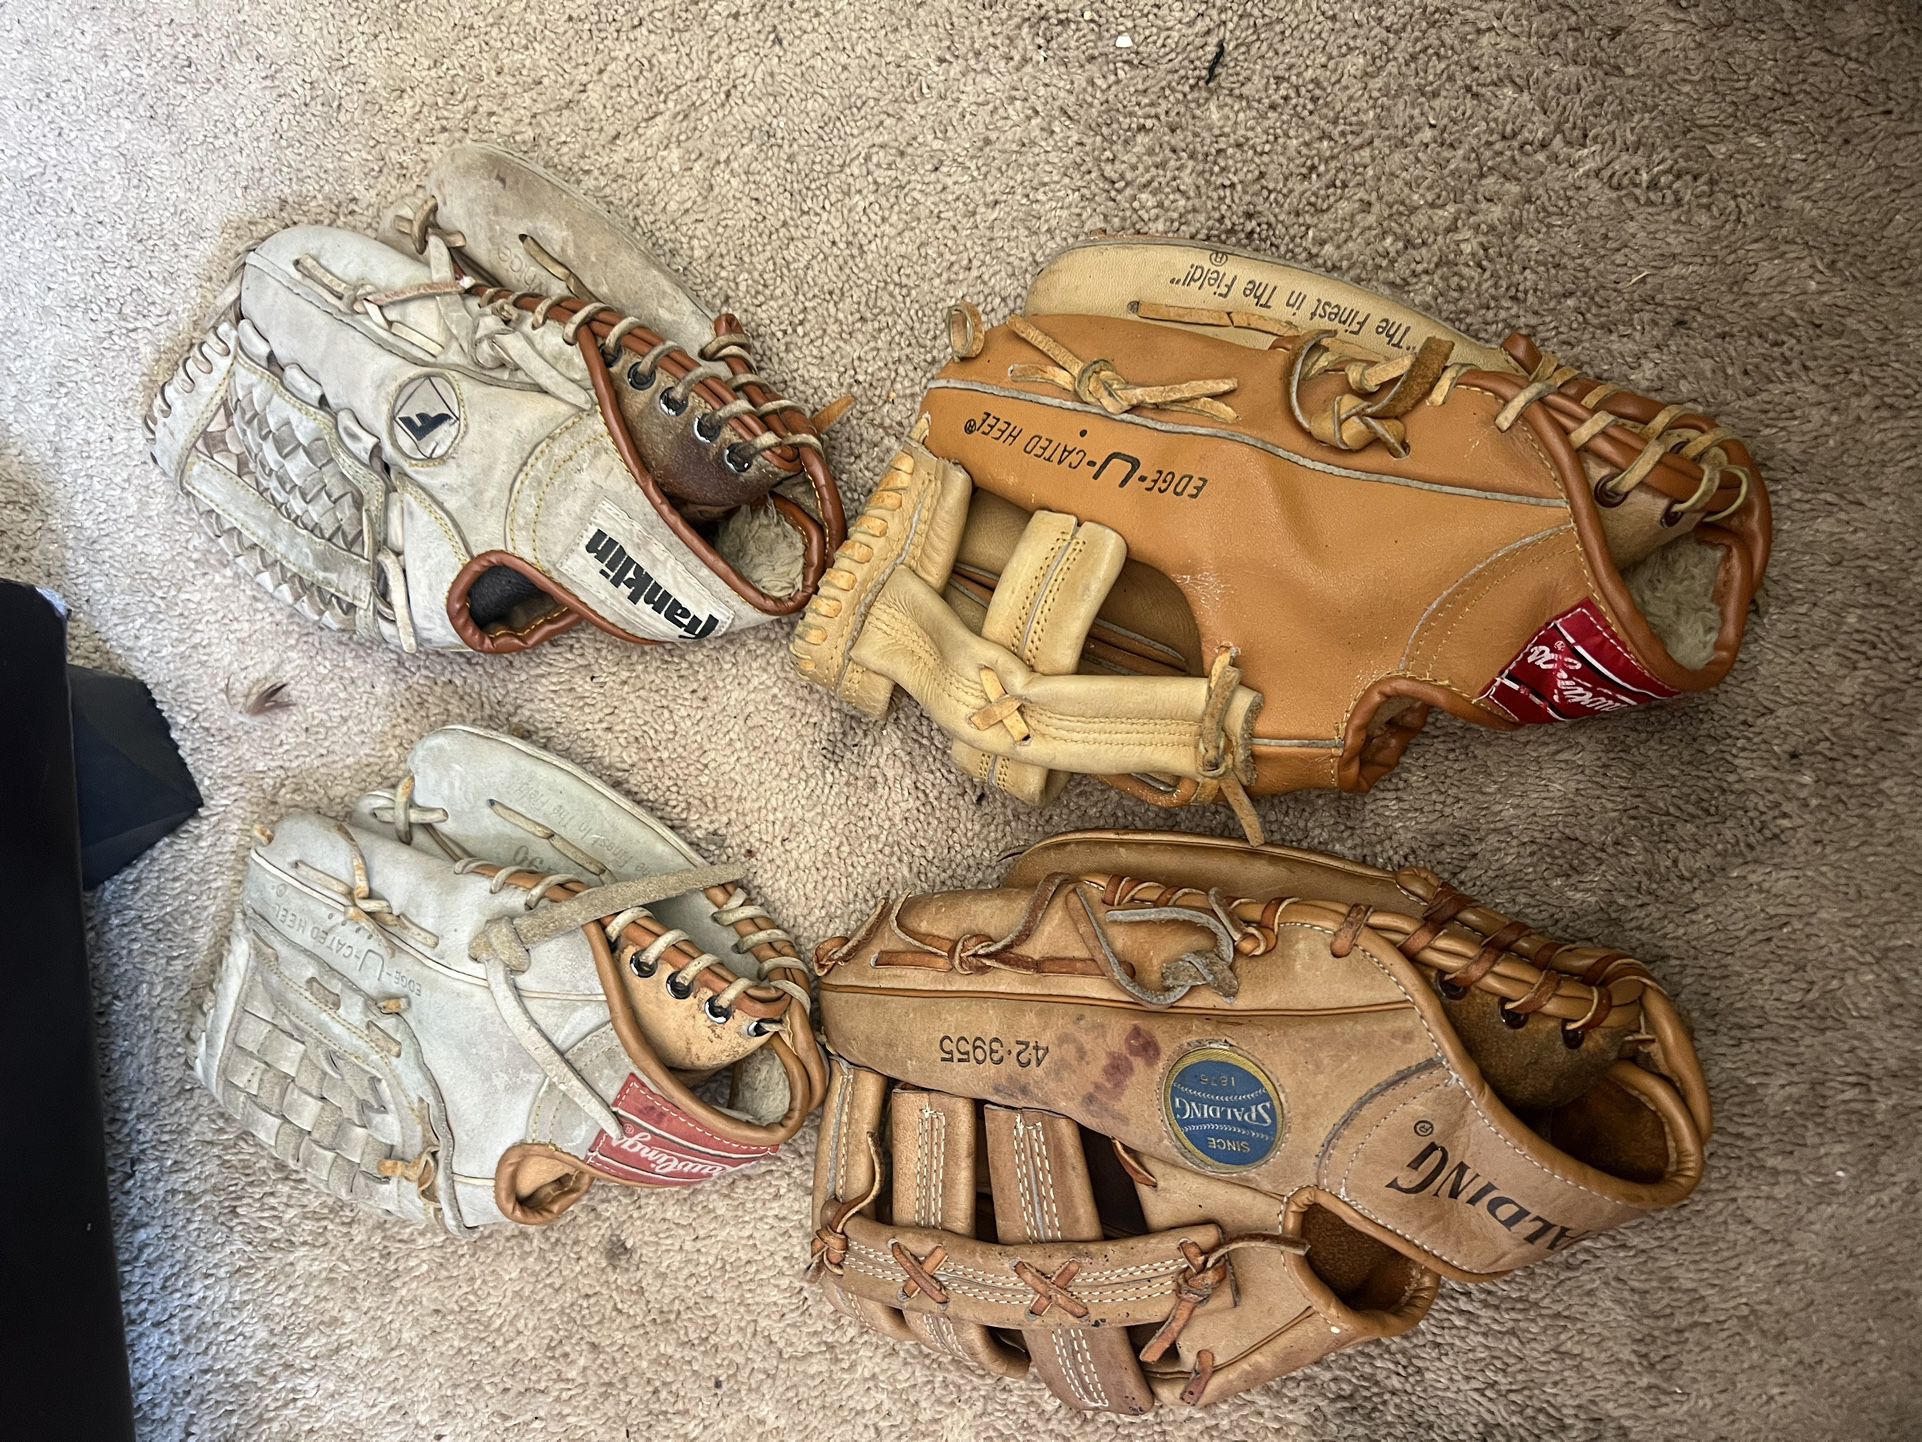 Youth Young Adult Baseball Gloves Rawlings Spalding Franklin 11” To 12” Rht Right Handed Thrower  Have Smaller And Bigger Gloves Too Lefty Or Righty